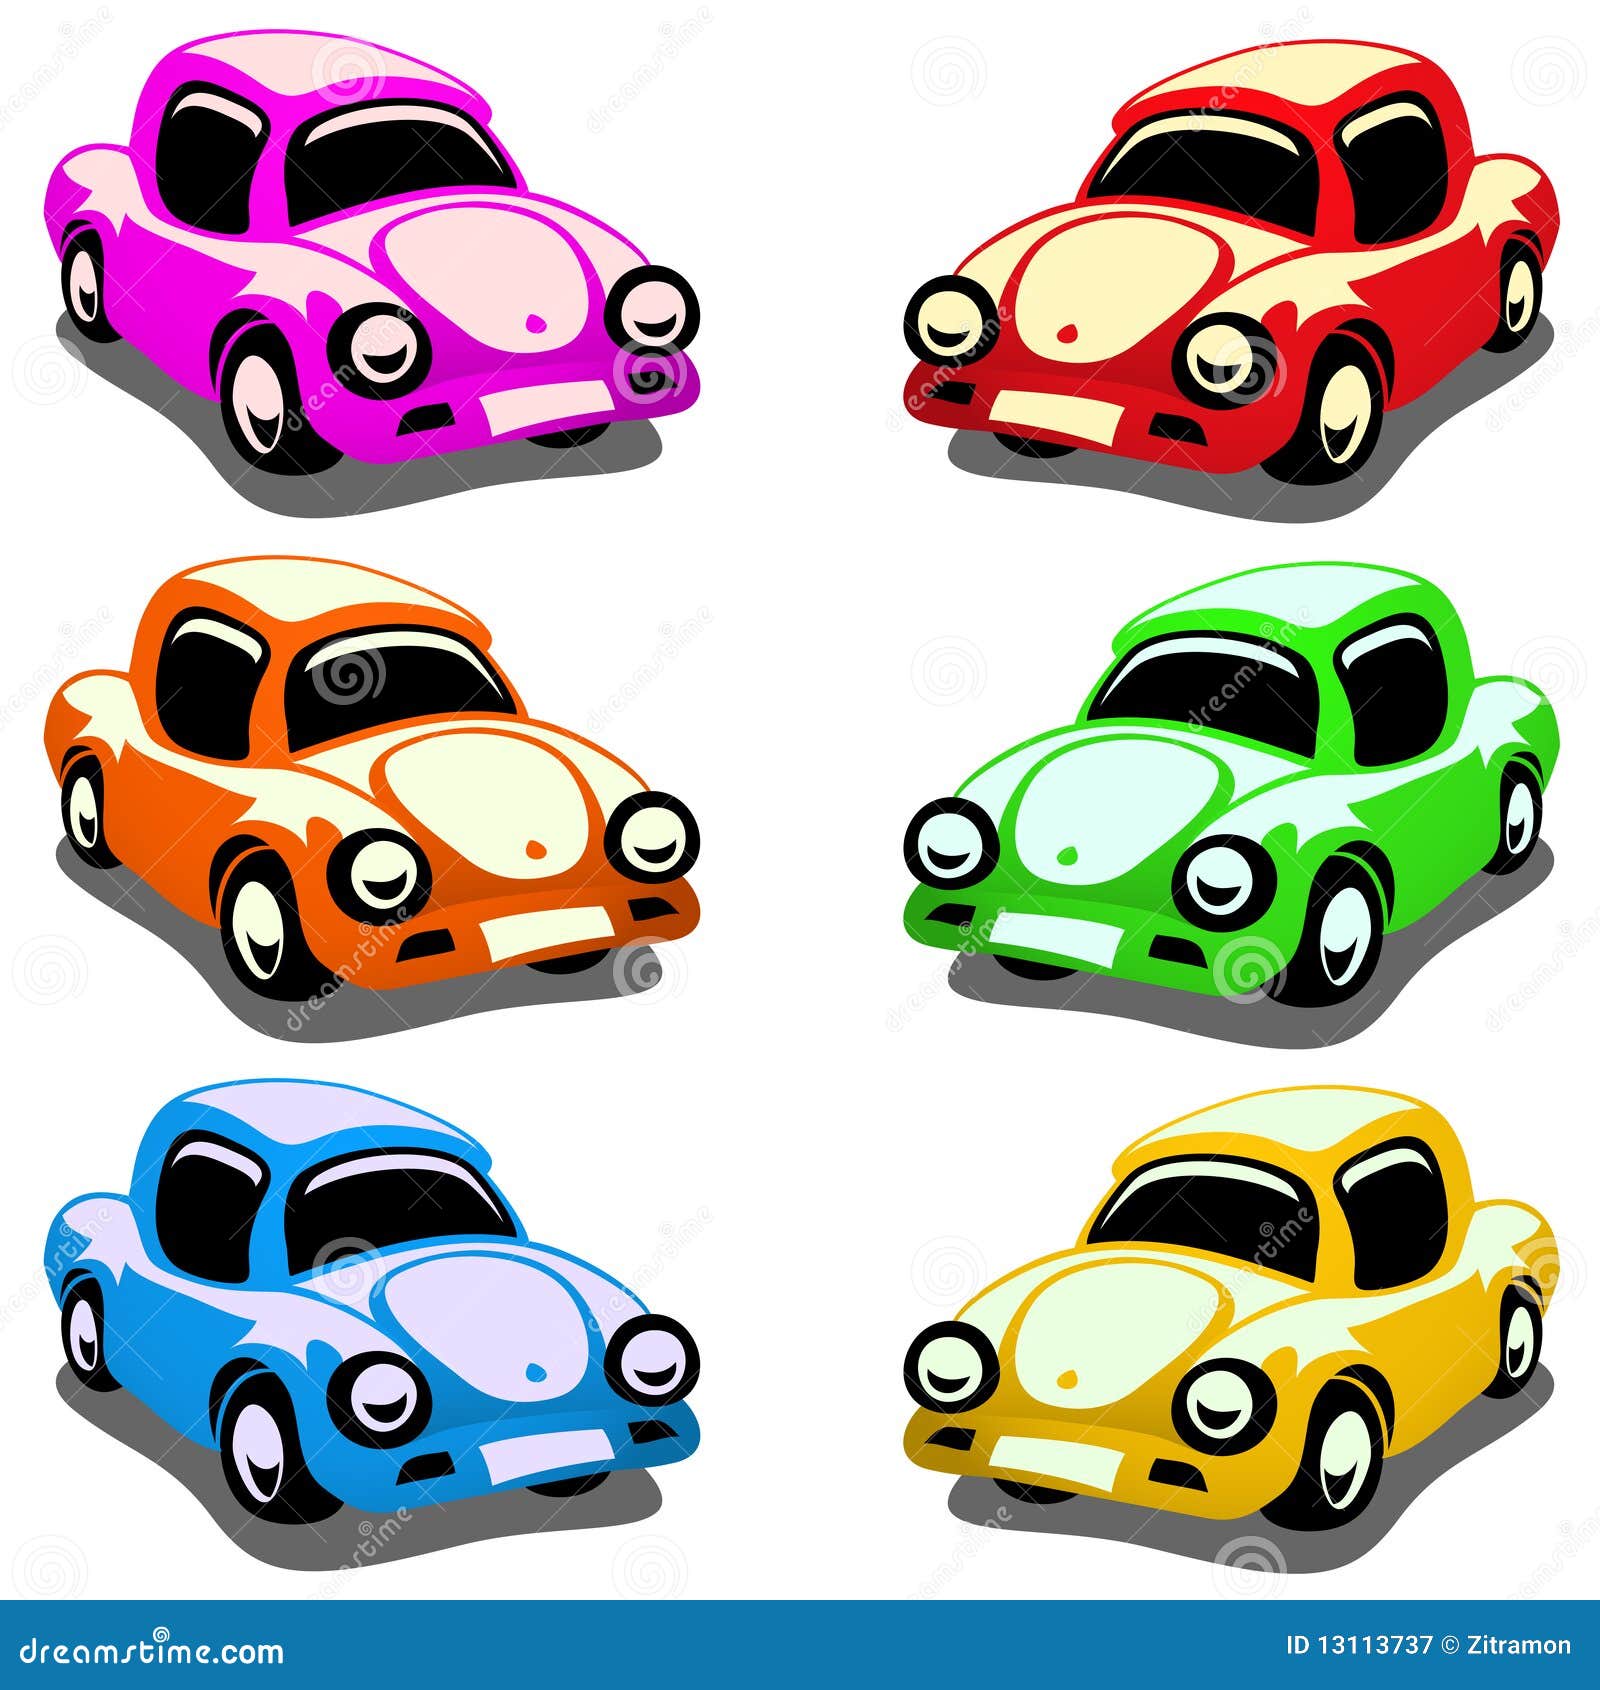 clipart pictures toy cars - photo #3